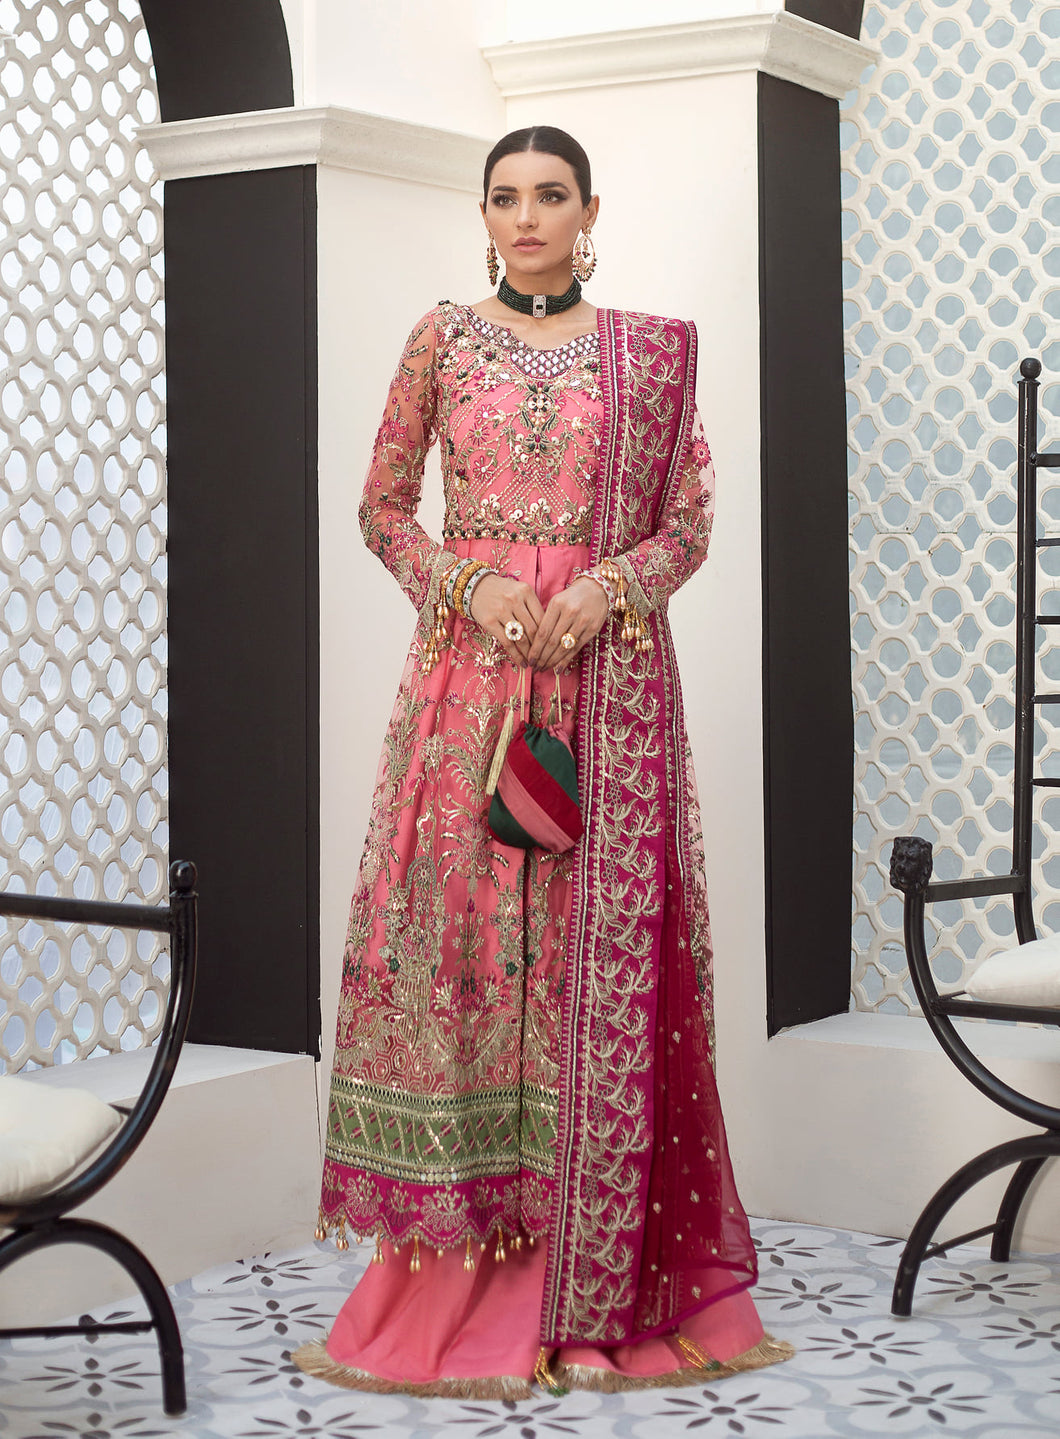 Buy GULAAL | Luxury Formals Eid Collection 2021 | Sofia | D-7 Shocking Pink dress from Lebaasonline in UK at best price- SALE ! Shop Now Gulal, Maria b, Sana Safinaz bridal dress  for Wedding, Party & Bridal dress in UK Get Pakistani Designer Dresses in UK Unstitched and Stitched Ready to Wear by Gulaal in the UK & USA